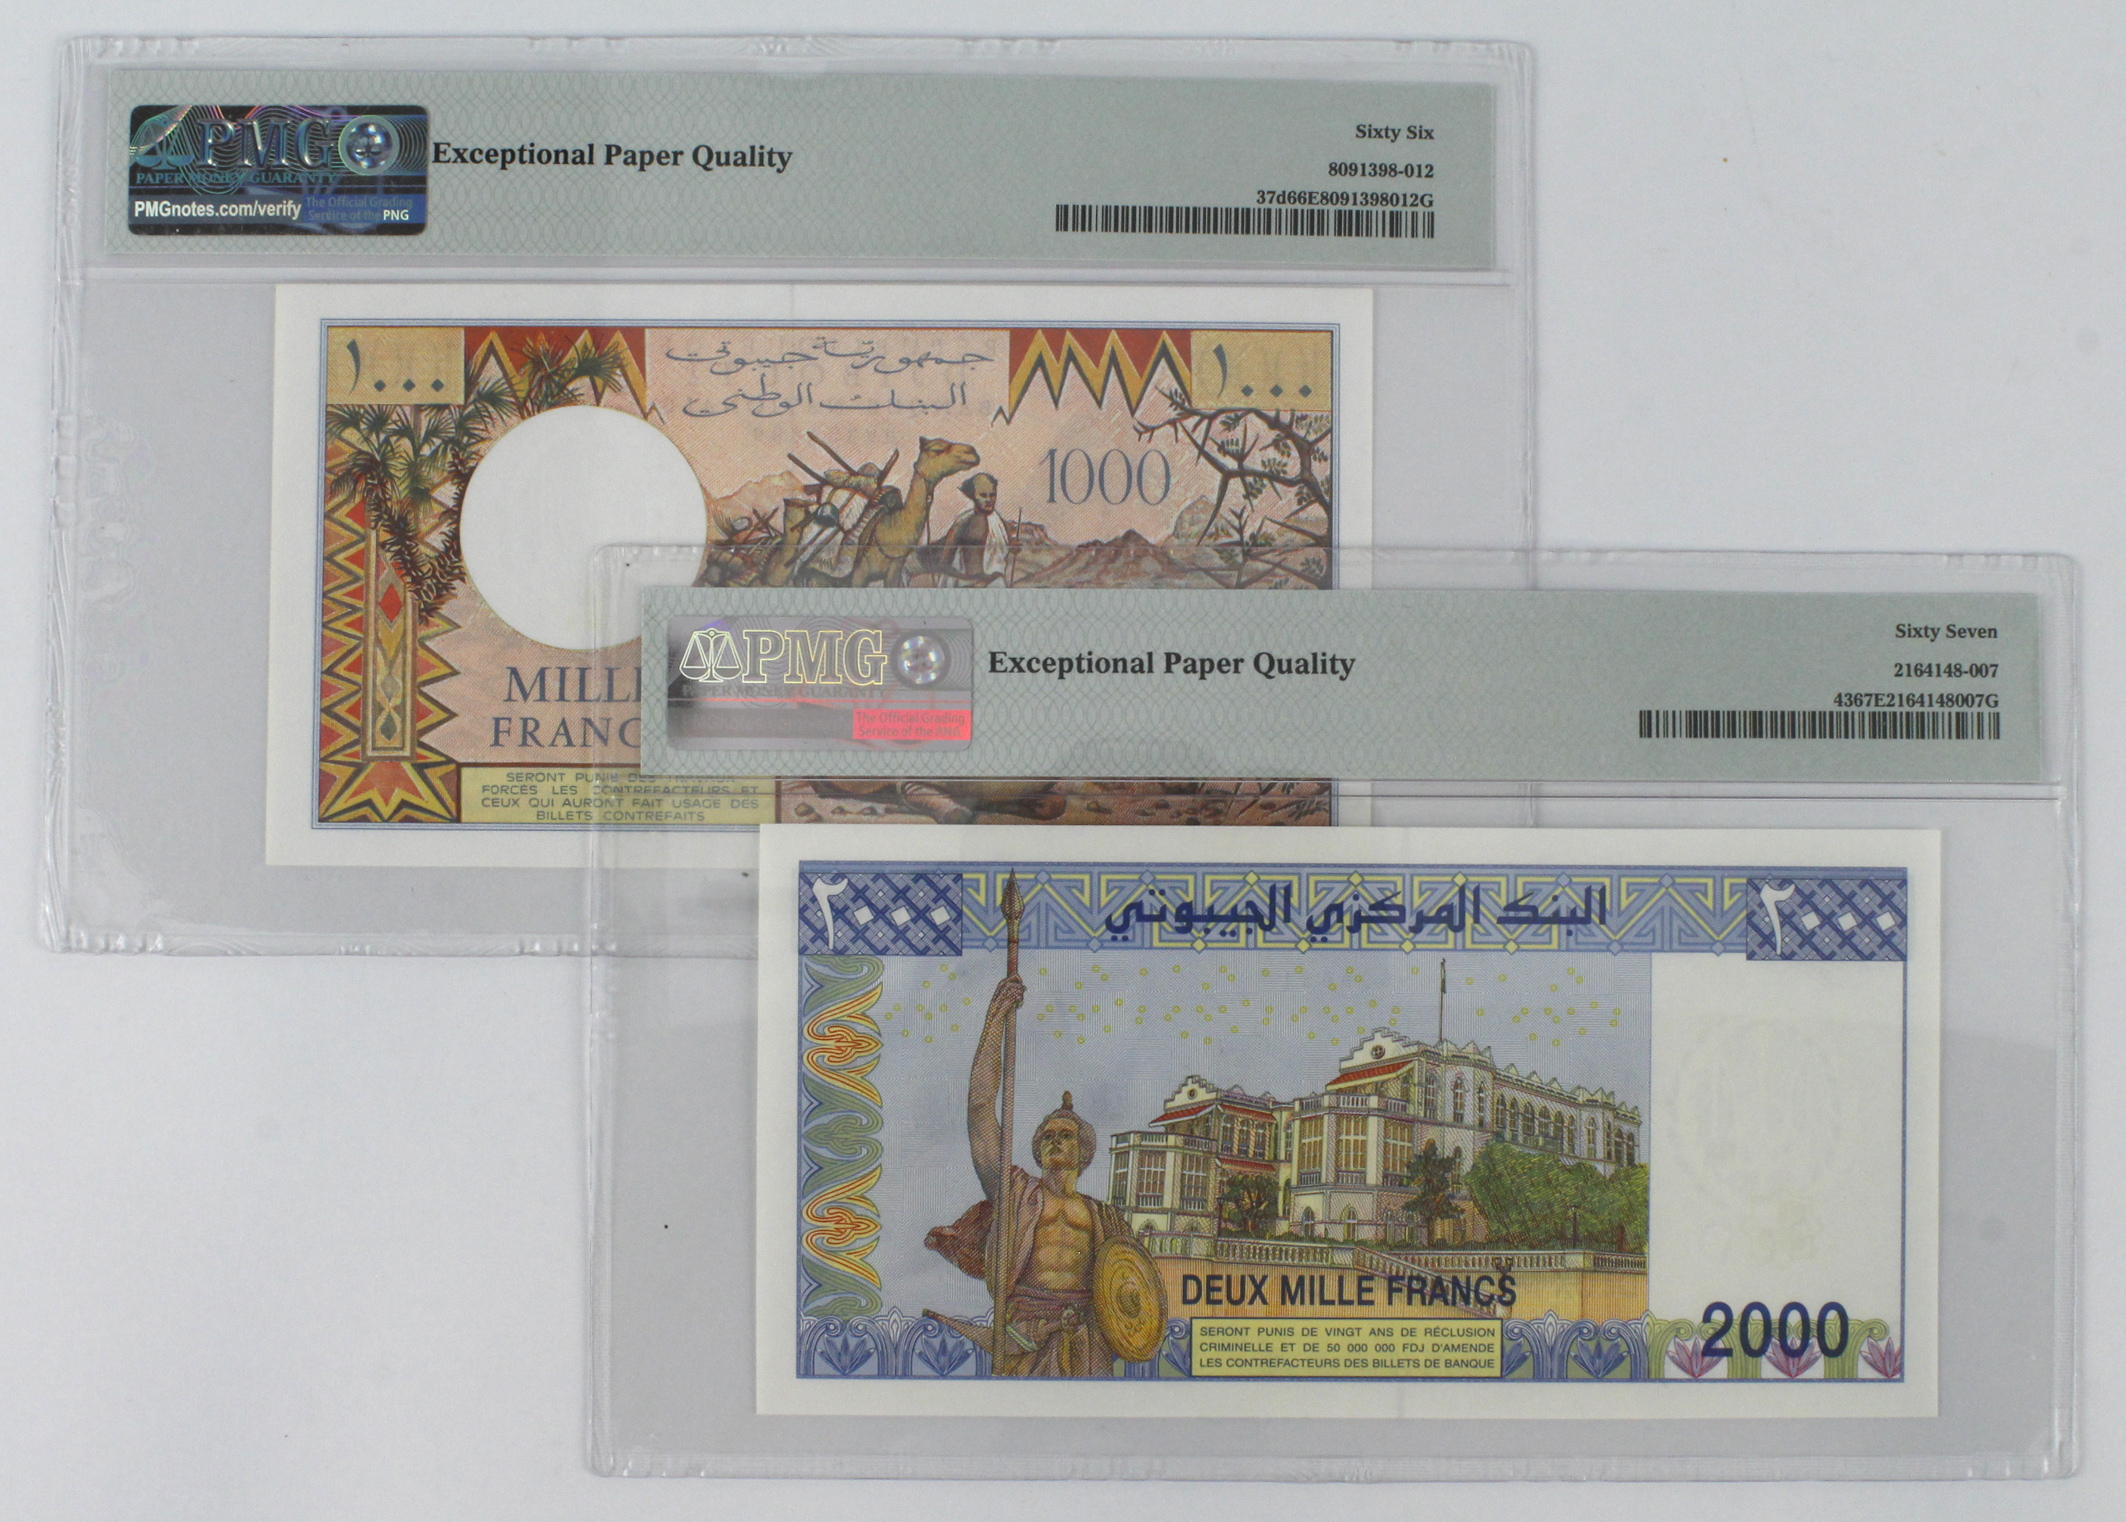 Djibouti (2), 1000 Francs issued 1991, serial T.004 54099 (TBB B102e, Pick37d) in PMG holder - Image 2 of 2